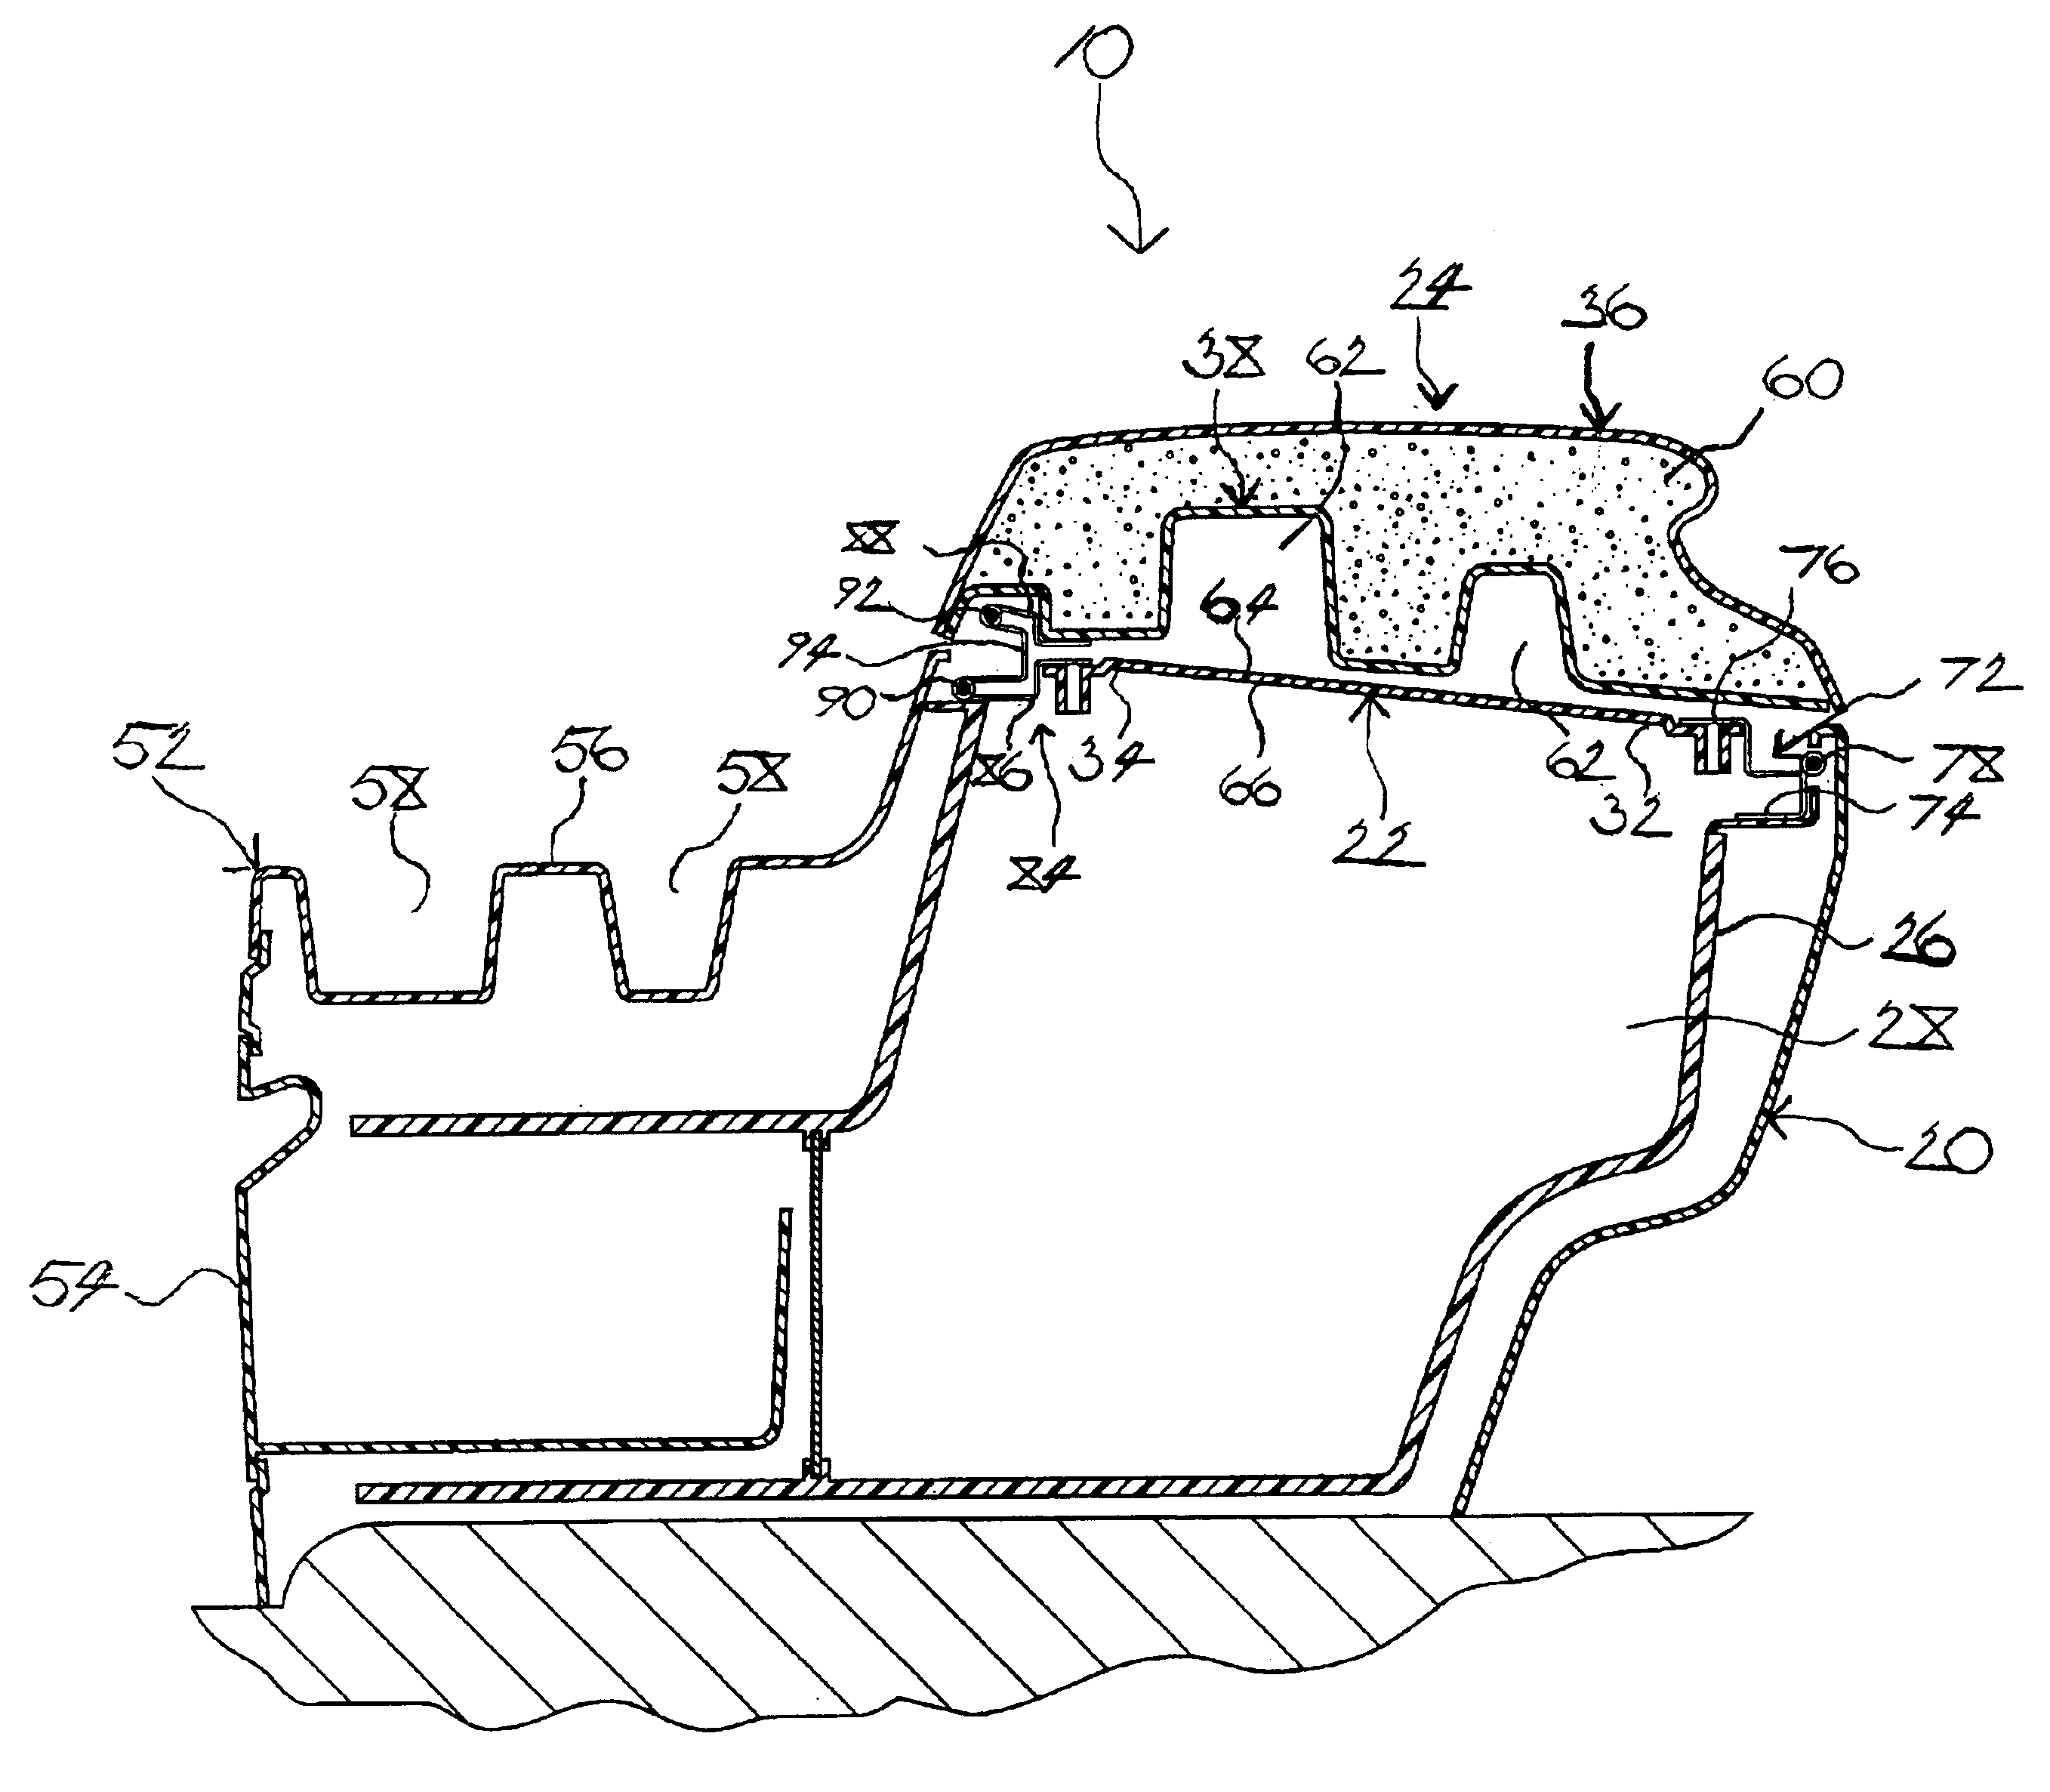 Console system having a double-hinged lid